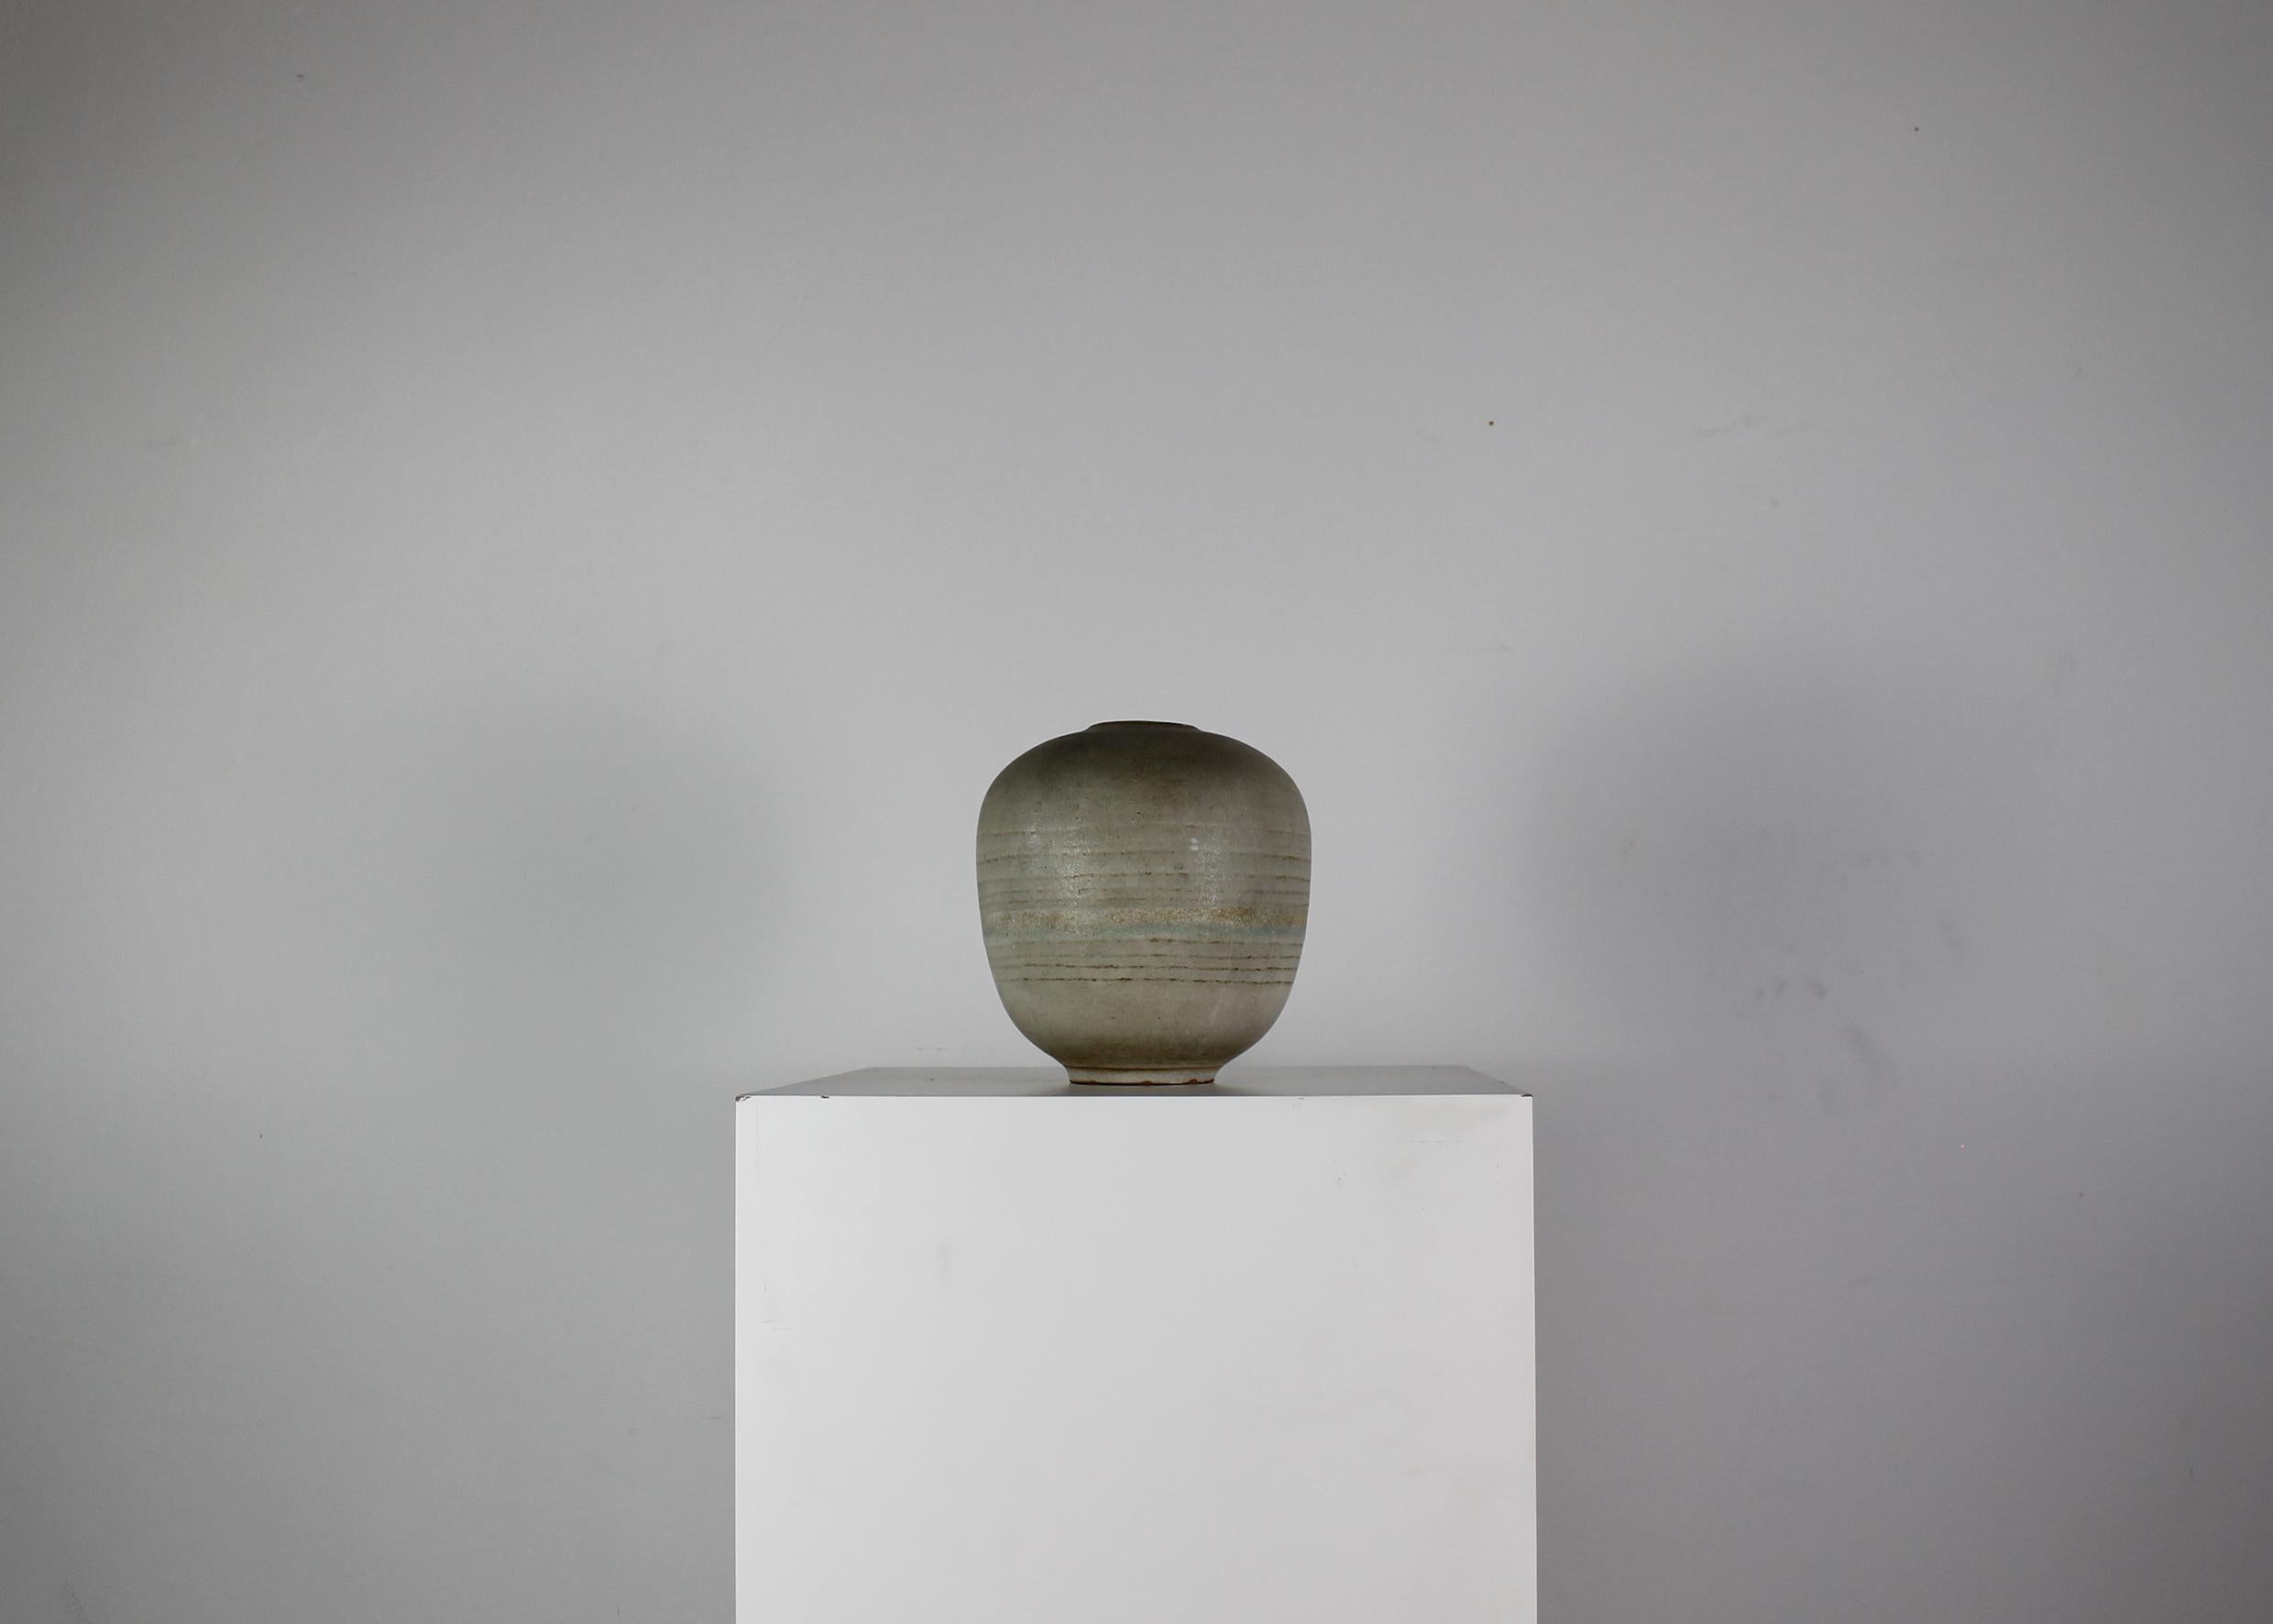 Decorative vase realized in a warm gray stoneware with band decorations, designed and manufactured by Carlo Zauli in 1960s. 

Signature engraved visible under the base.

After winning the main awards dedicated to ceramic art in the 1950s, the early